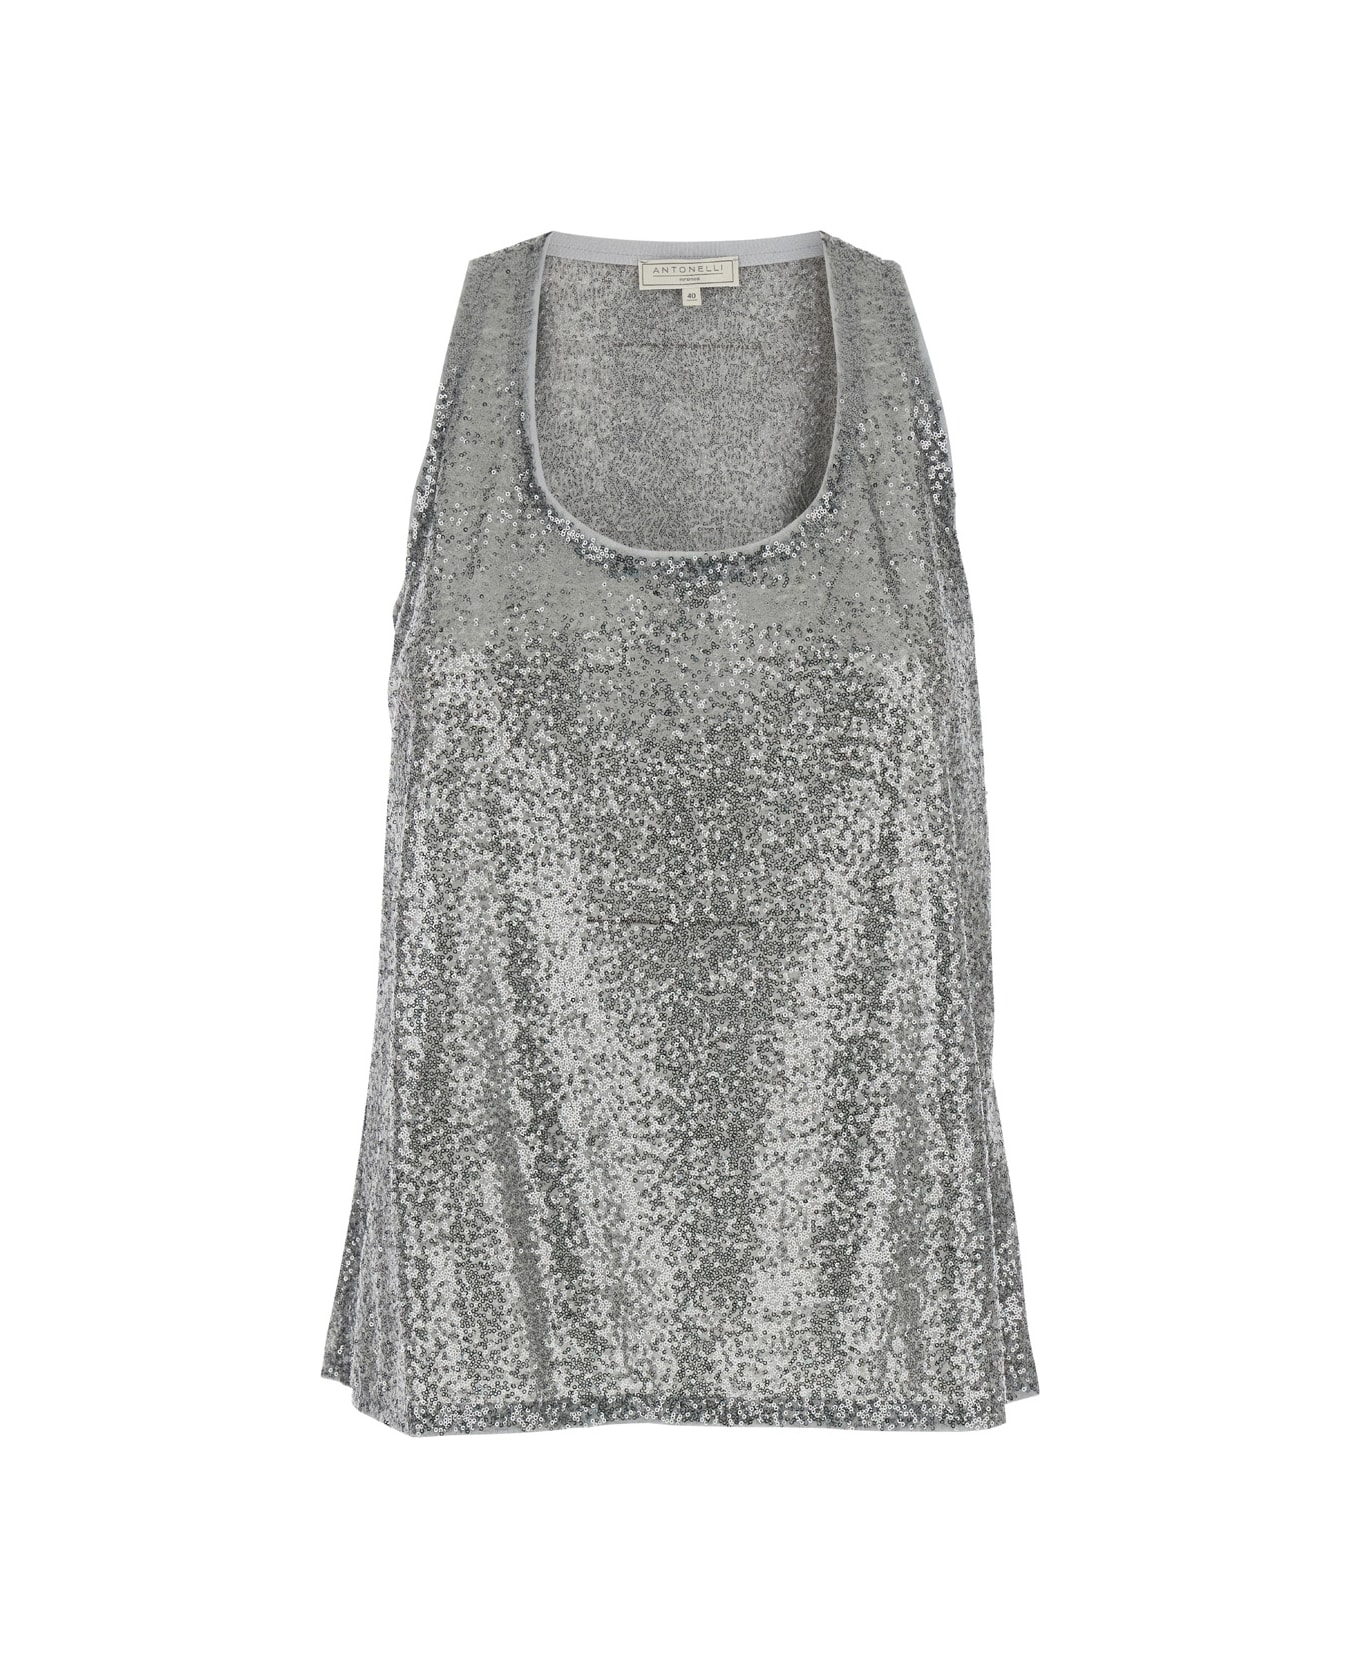 Antonelli Silver Top With Sequins In Techno Fabric Woman - White タンクトップ